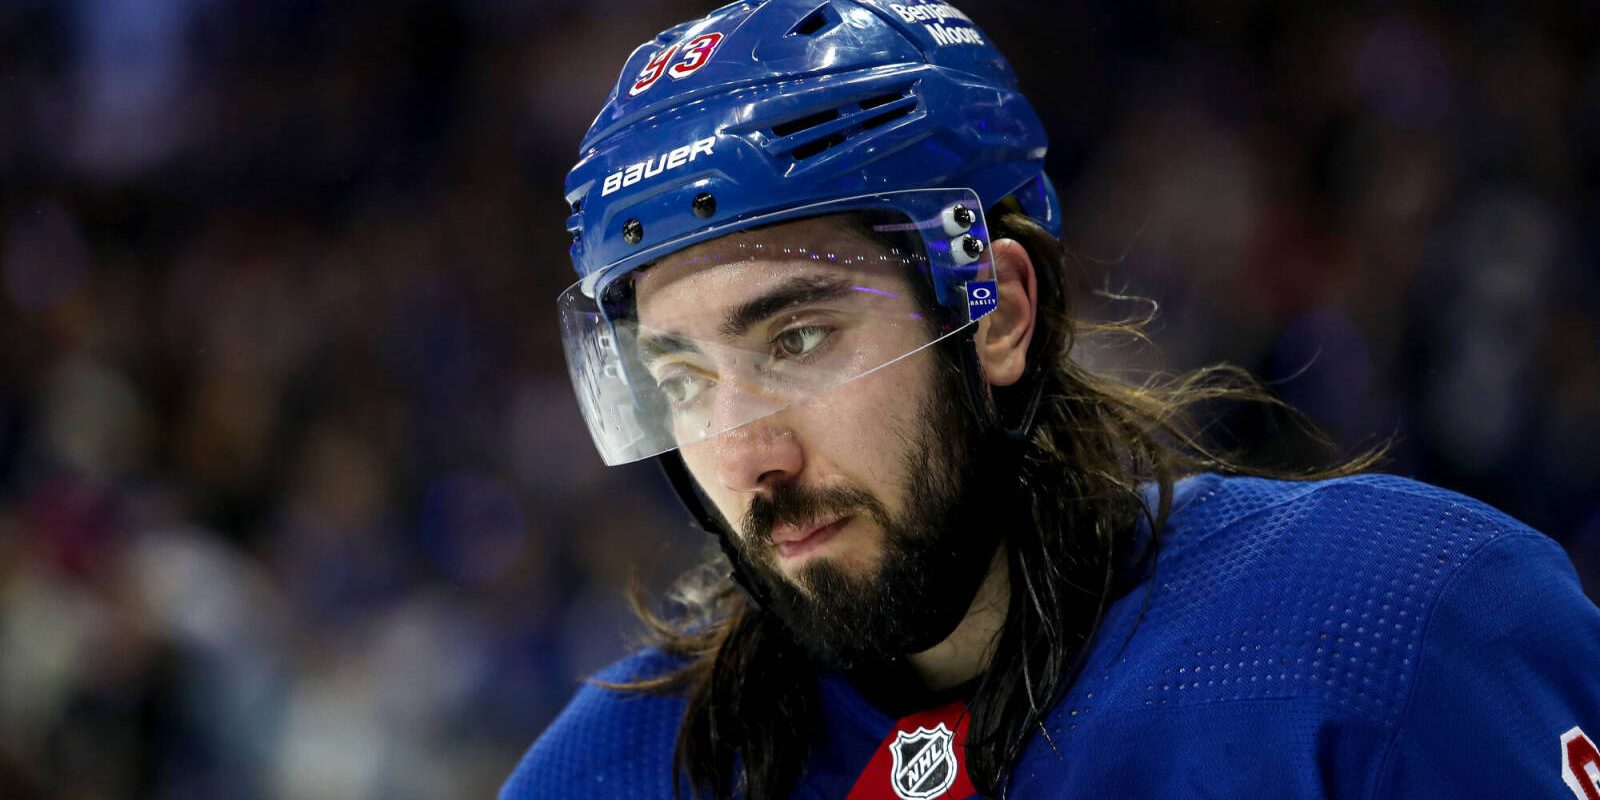 Apr 29, 2023; New York, New York, USA; New York Rangers center Mika Zibanejad (93) skates against the New Jersey Devils during the second period in game six of the first round of the 2023 Stanley Cup Playoffs at Madison Square Garden. Mandatory Credit: Danny Wild-USA TODAY Sports